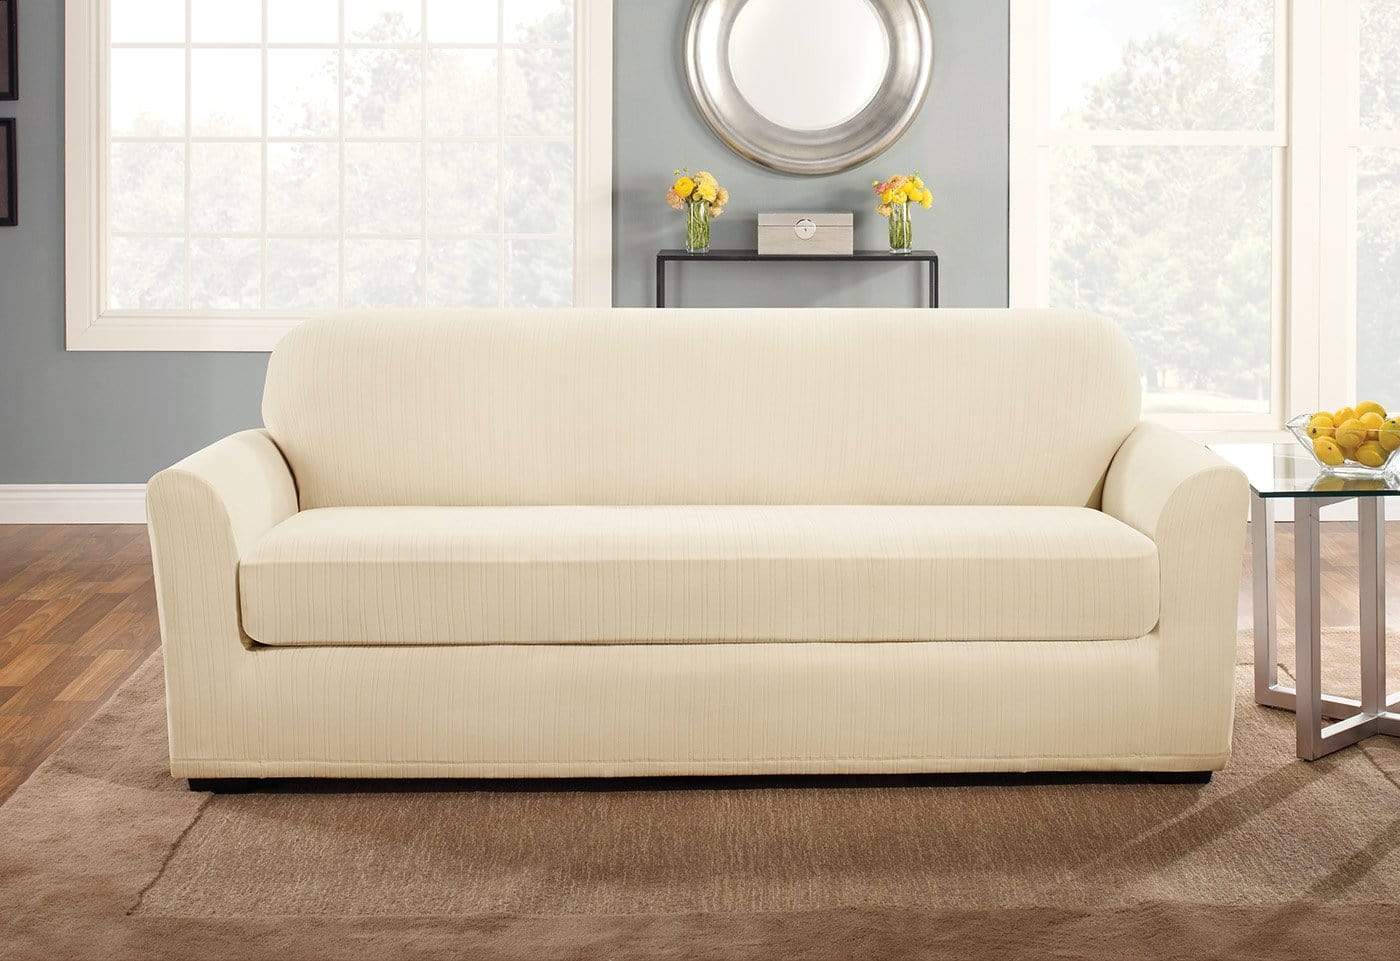 SureFit Stretch Pinstripe Two Piece Sofa Slipcover   Form Fit   Box Cushion   Machine Washable - Outlet in Cream